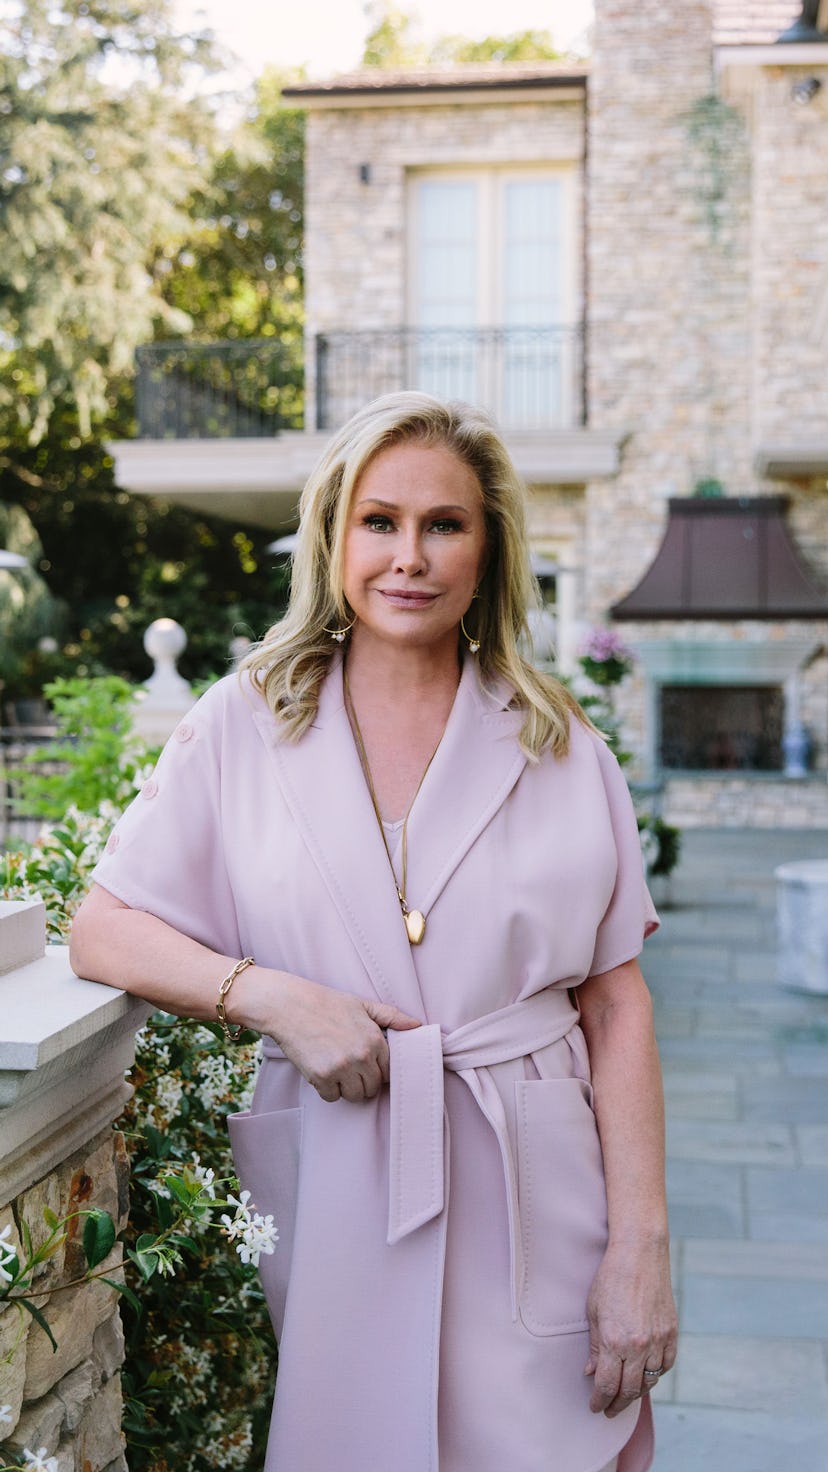 Kathy Hilton stands near a garden as she poses for Bustle.